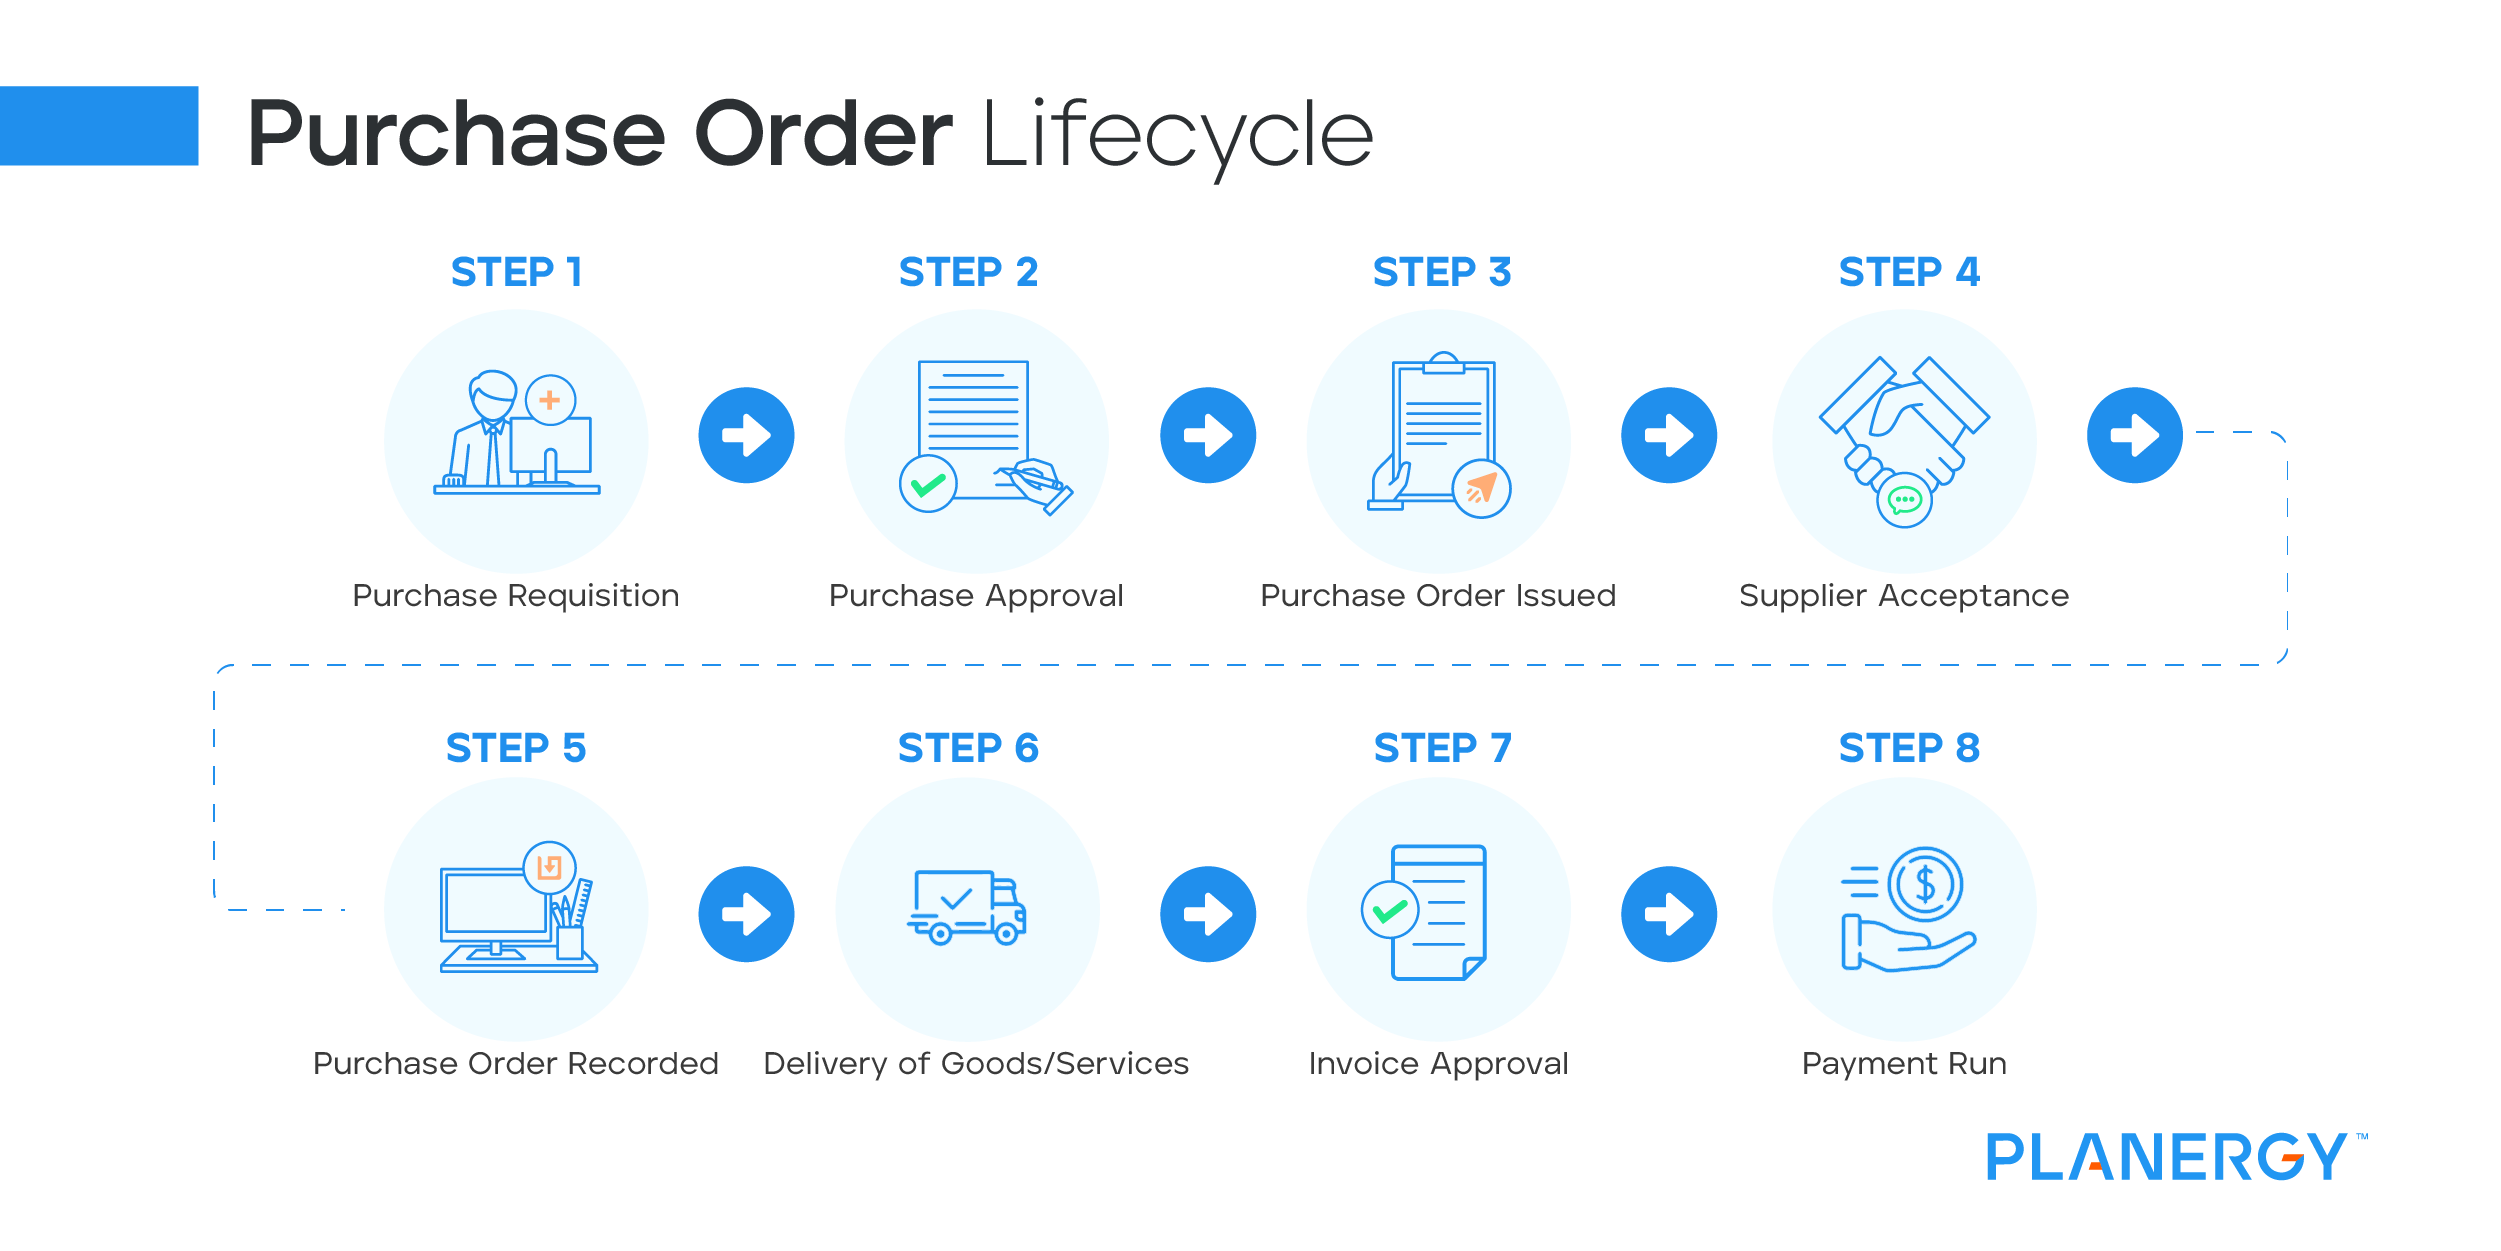 Purchase Order Lifecycle Diagram